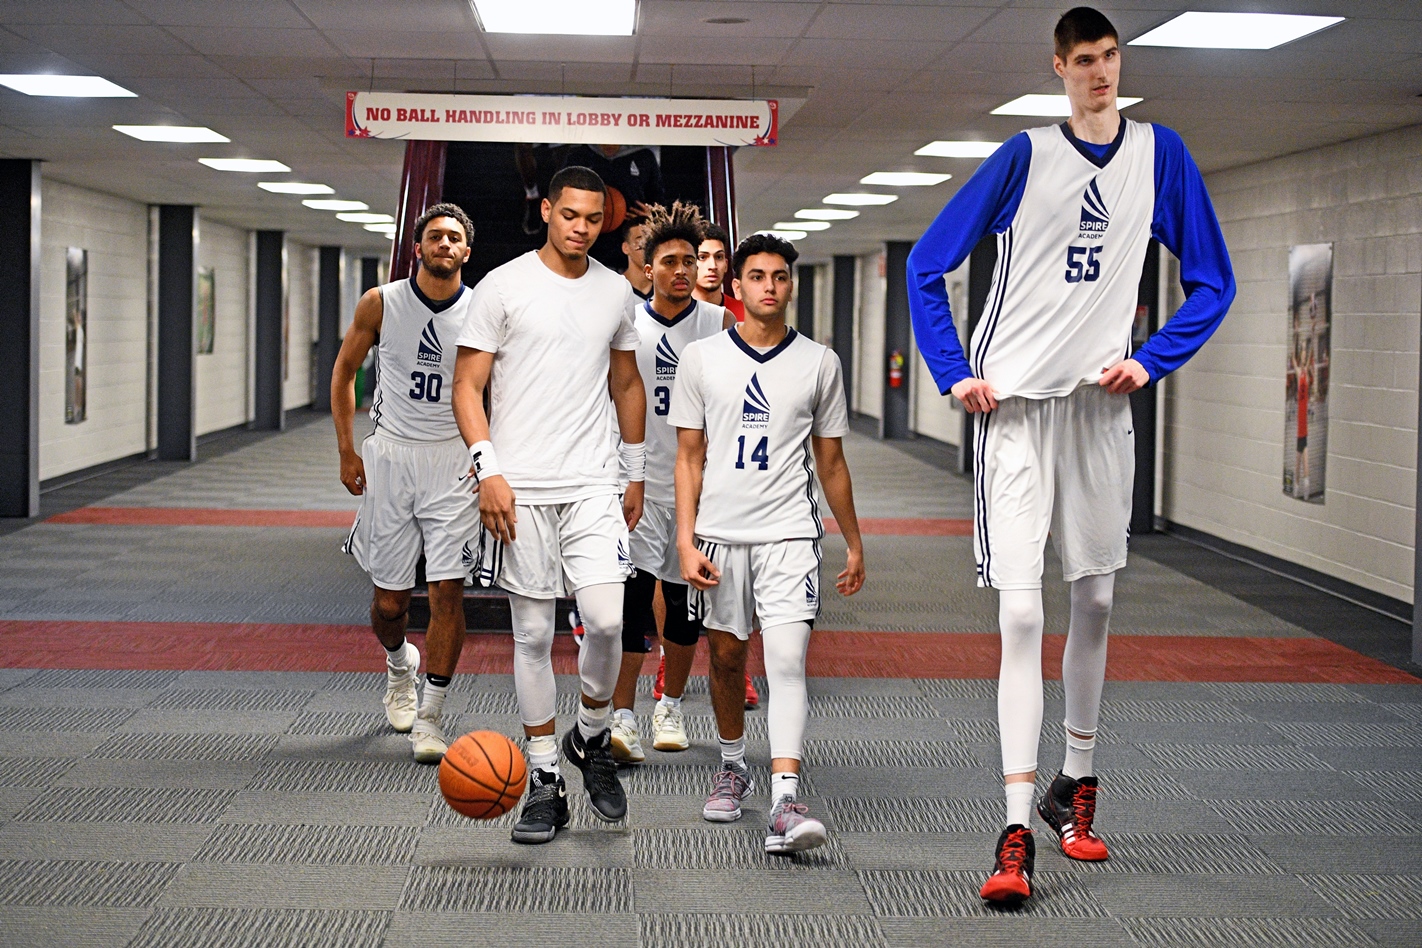 the-future-tallest-player-in-nba-transylvania-now